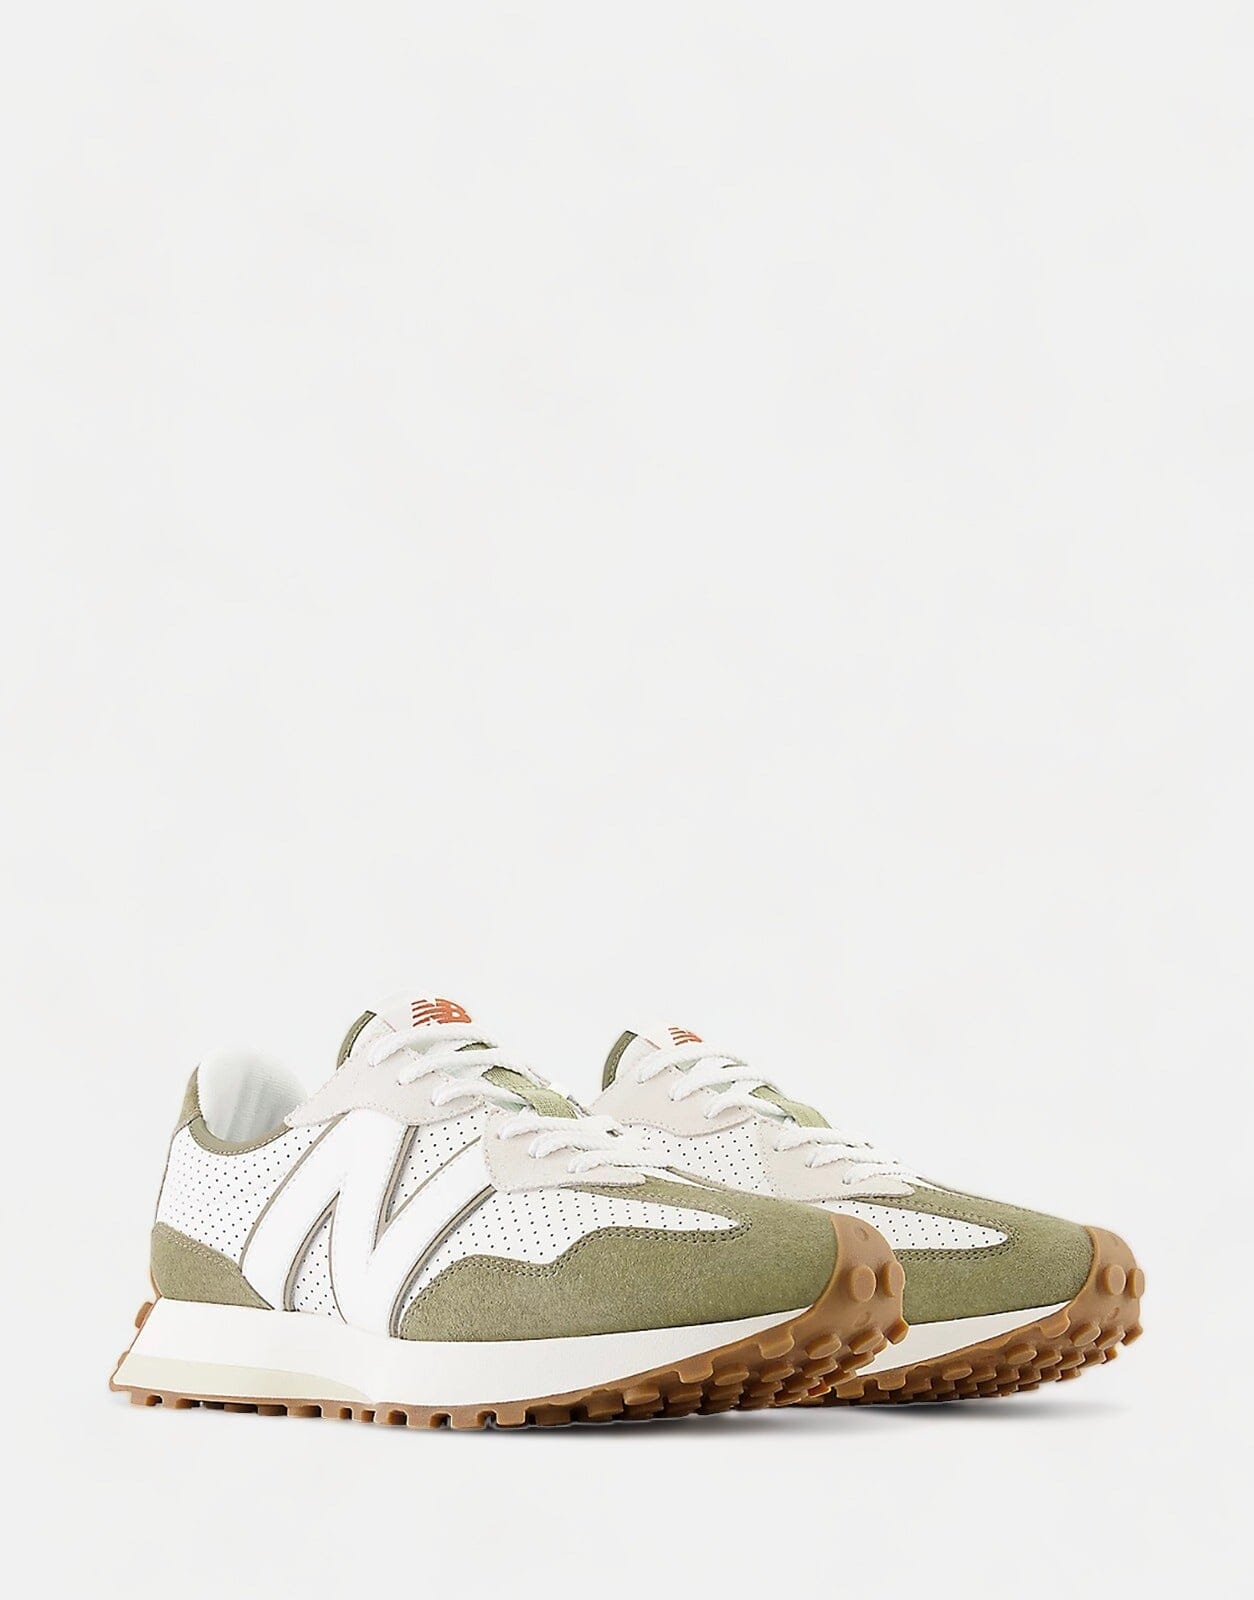 New Balance 327 Perforated Green Sneakers - Subwear